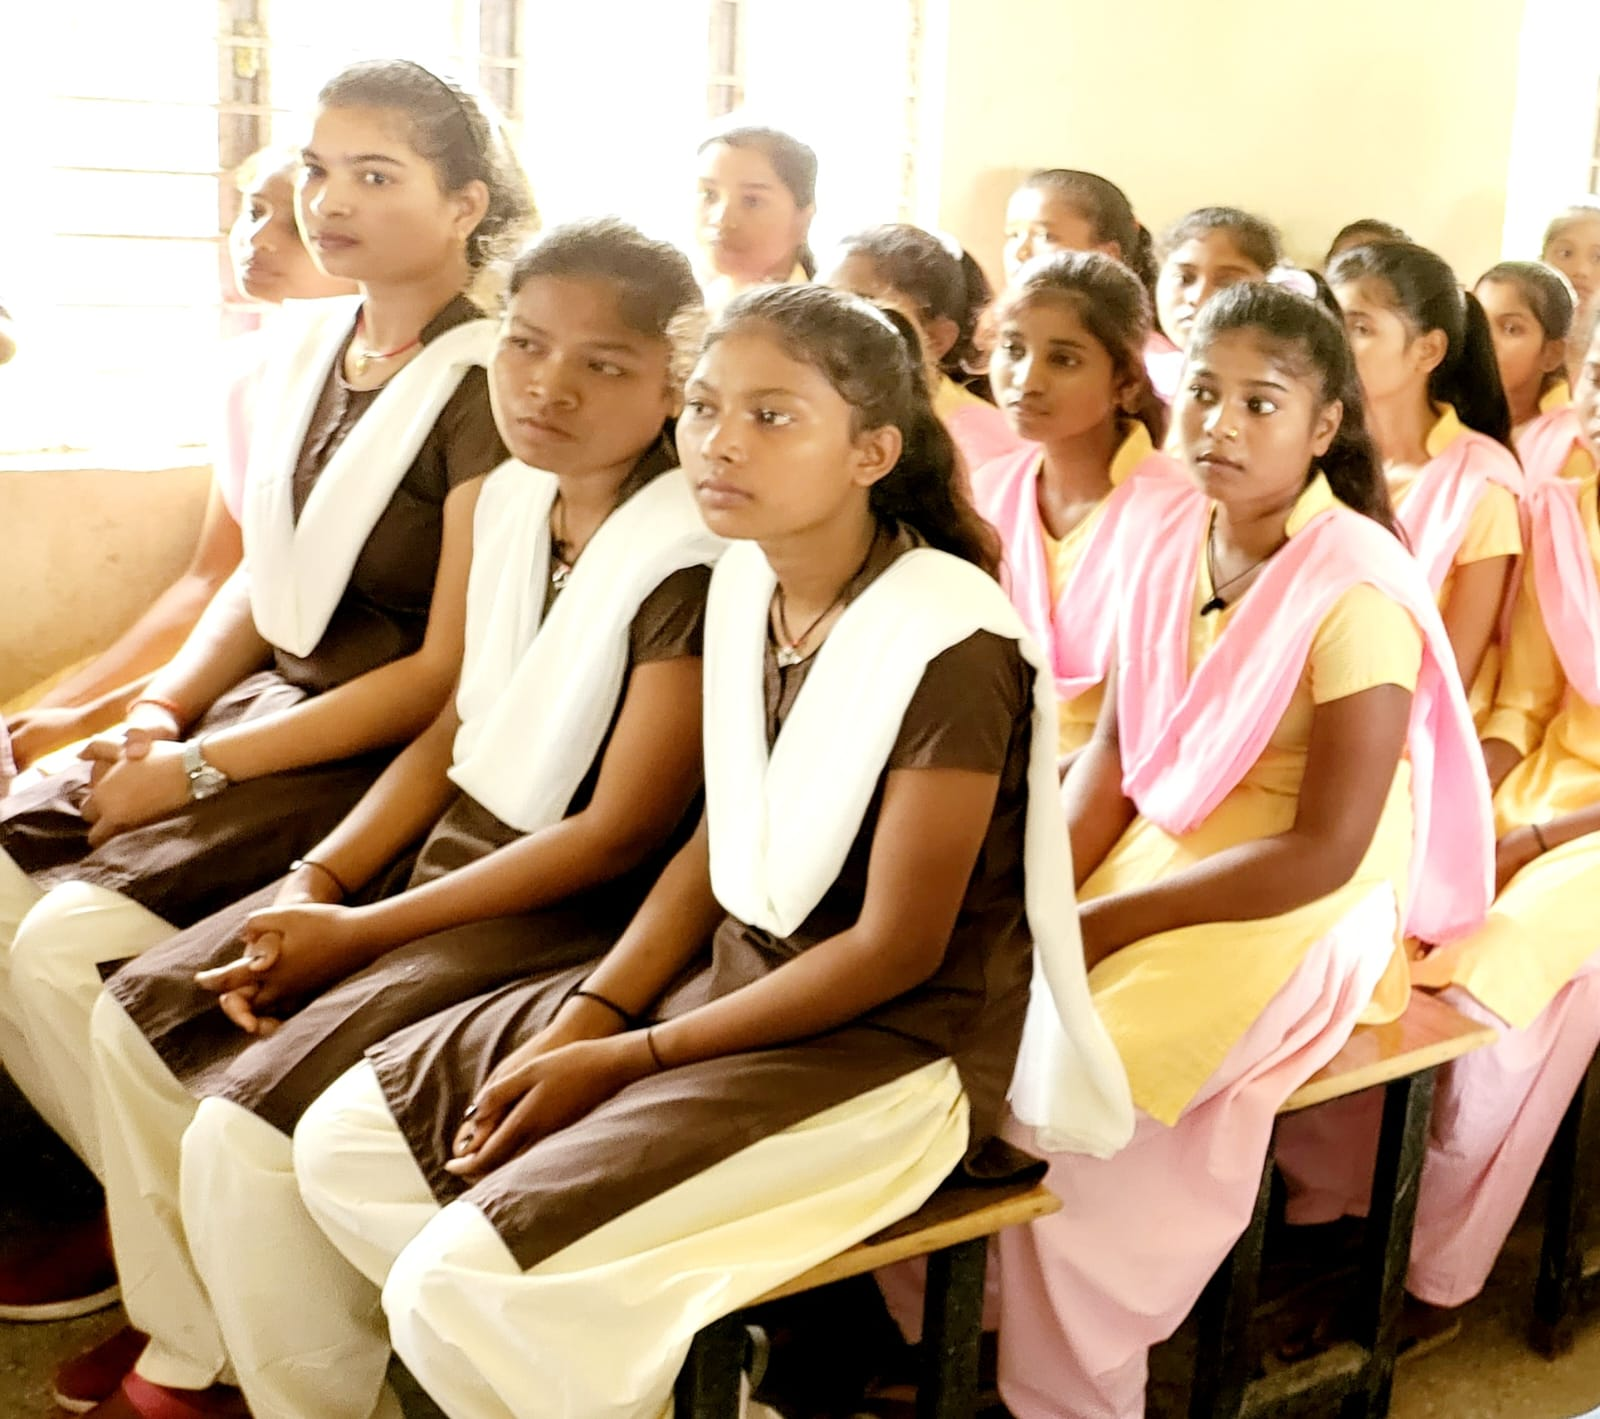 The girls of the government school of the village also speak fluent English